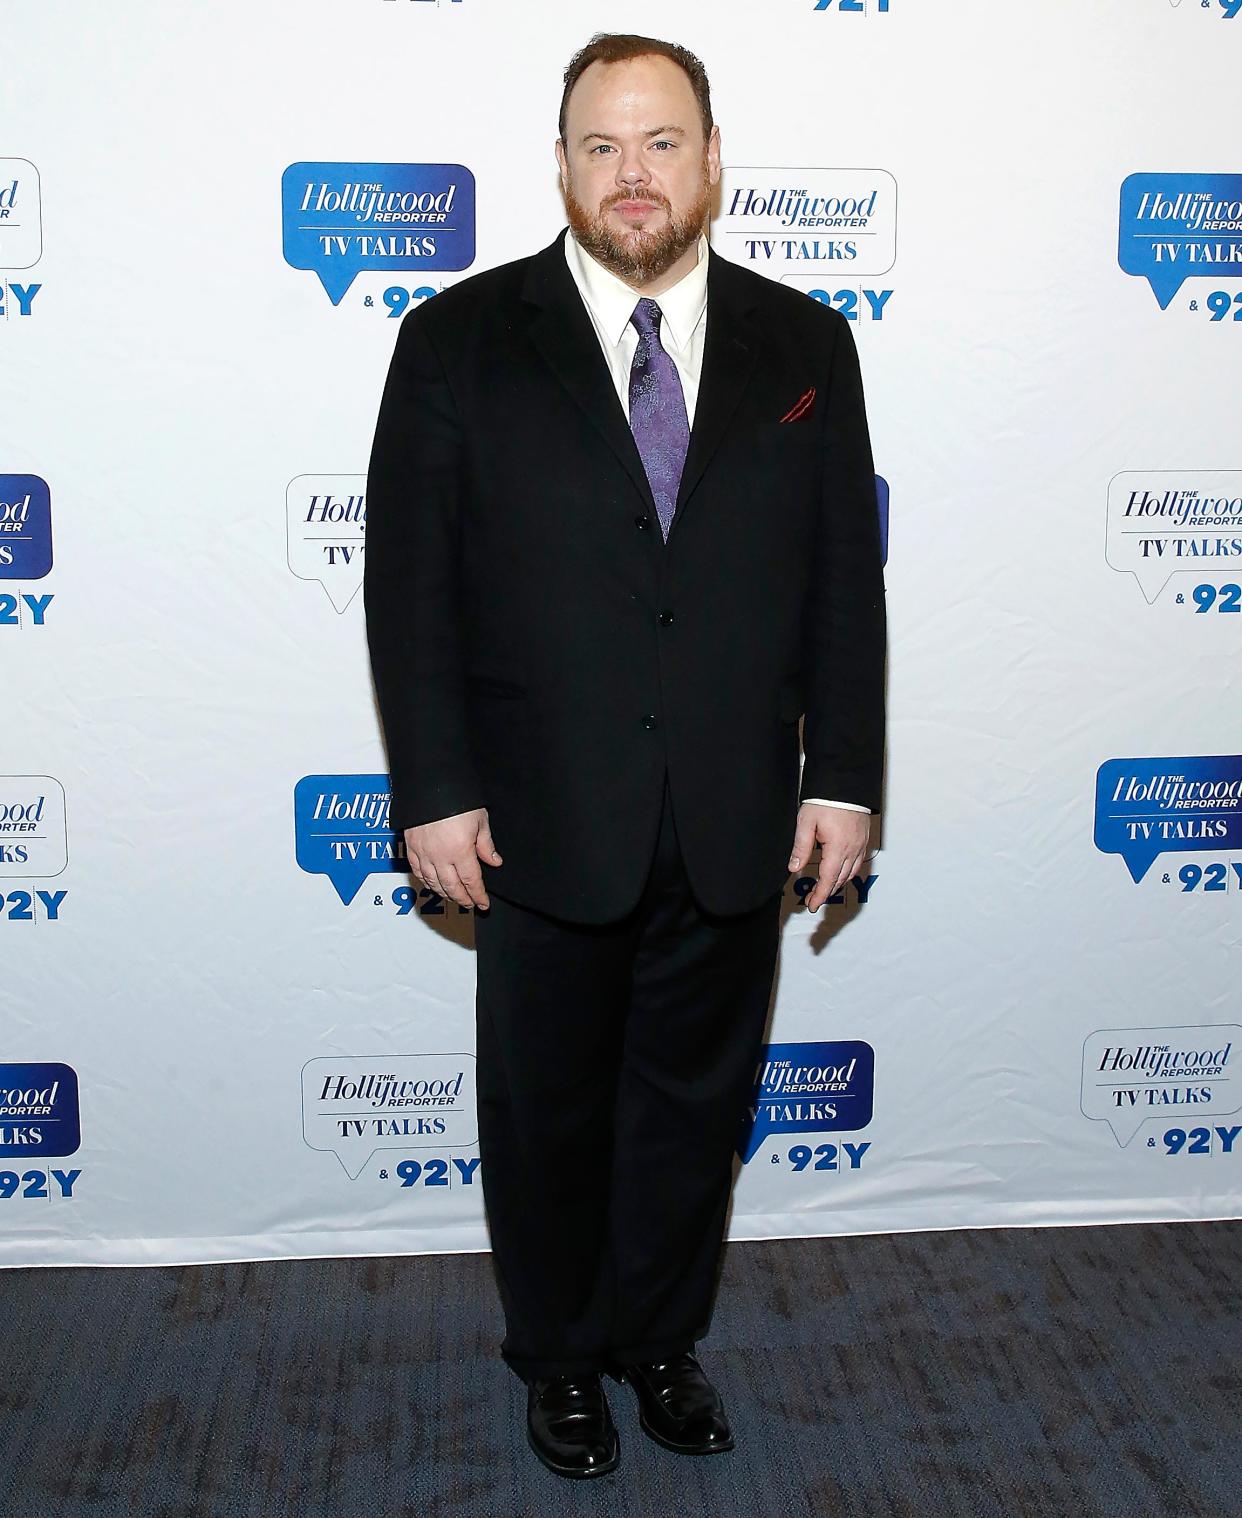 Home Alone Star Devin Ratray Domestic Violence Trial Delayed After Critical Hospitalization